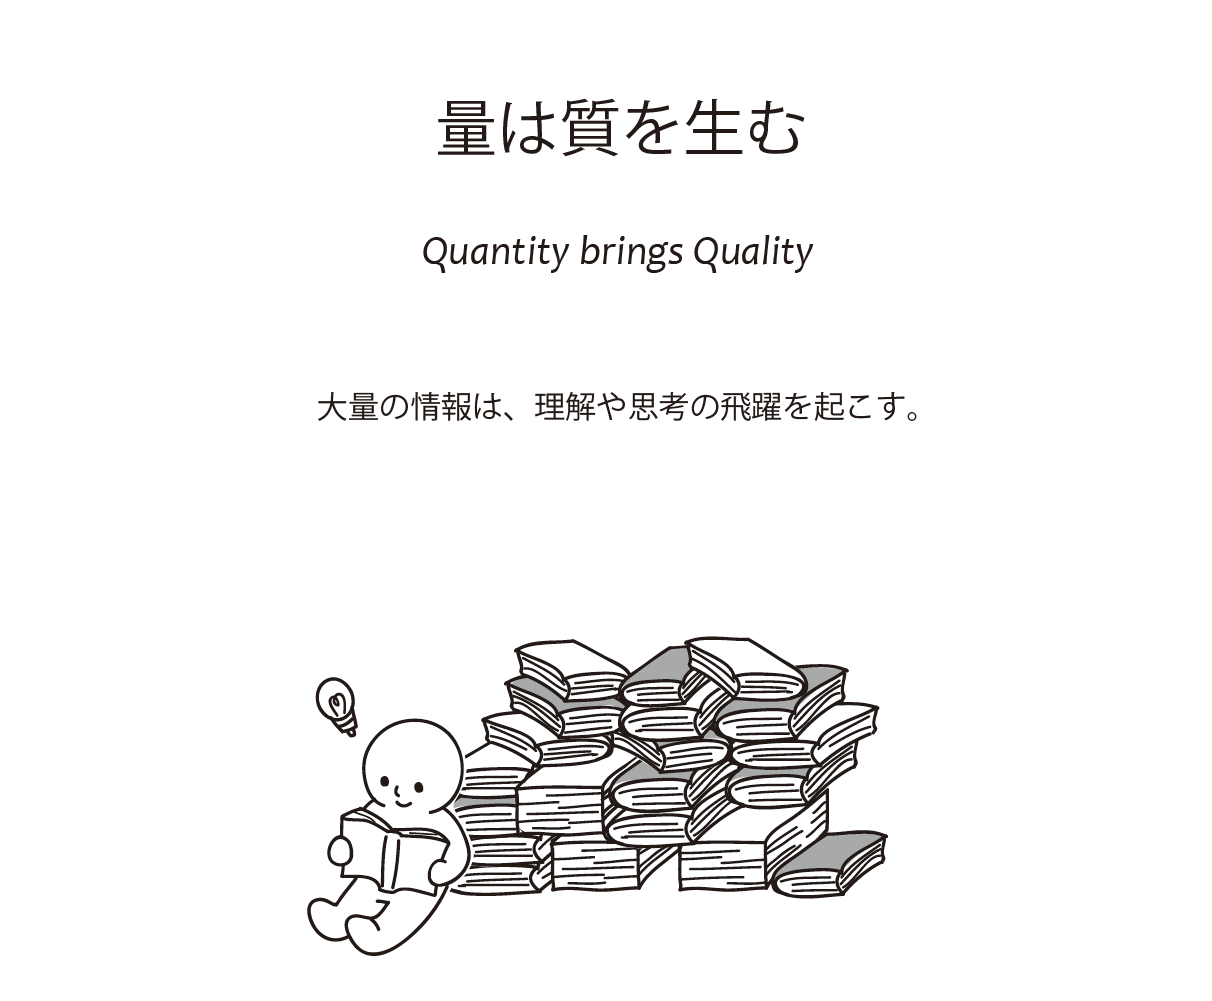 QuantityBringsQuality.png